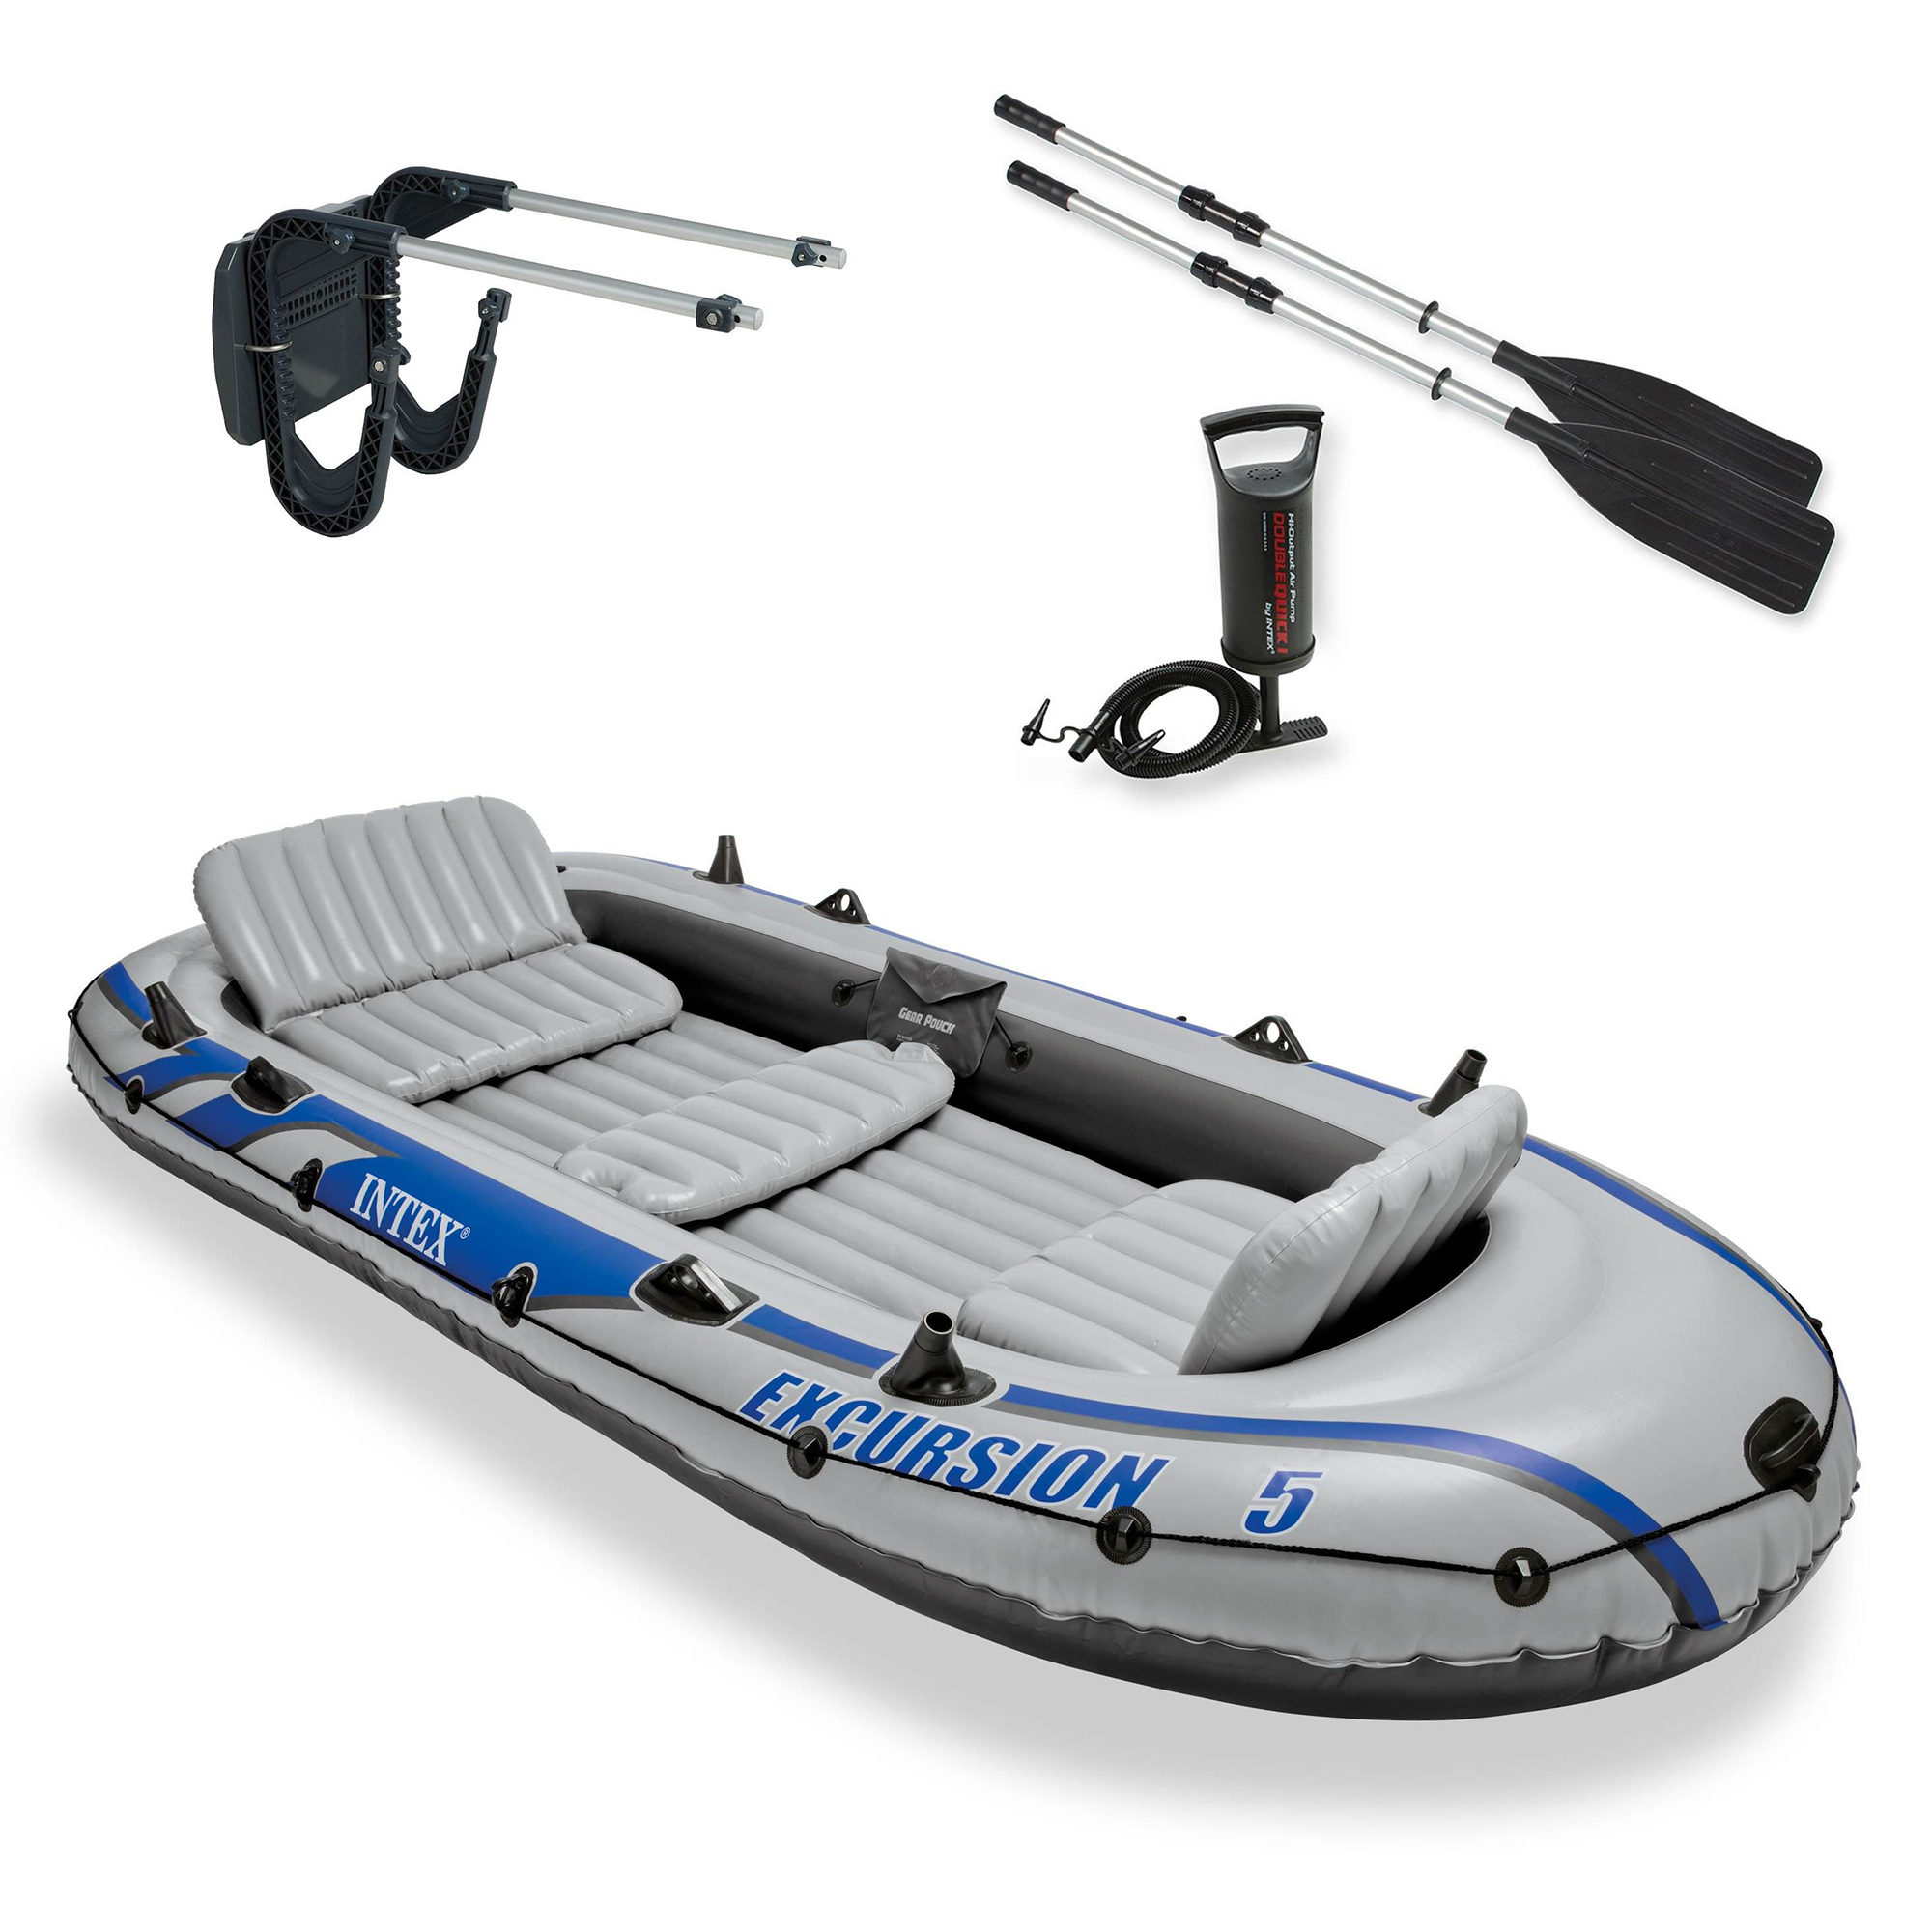 Intex Excursion 5 Person Inflatable Fishing Boat with Composite Motor Mount - image 1 of 13